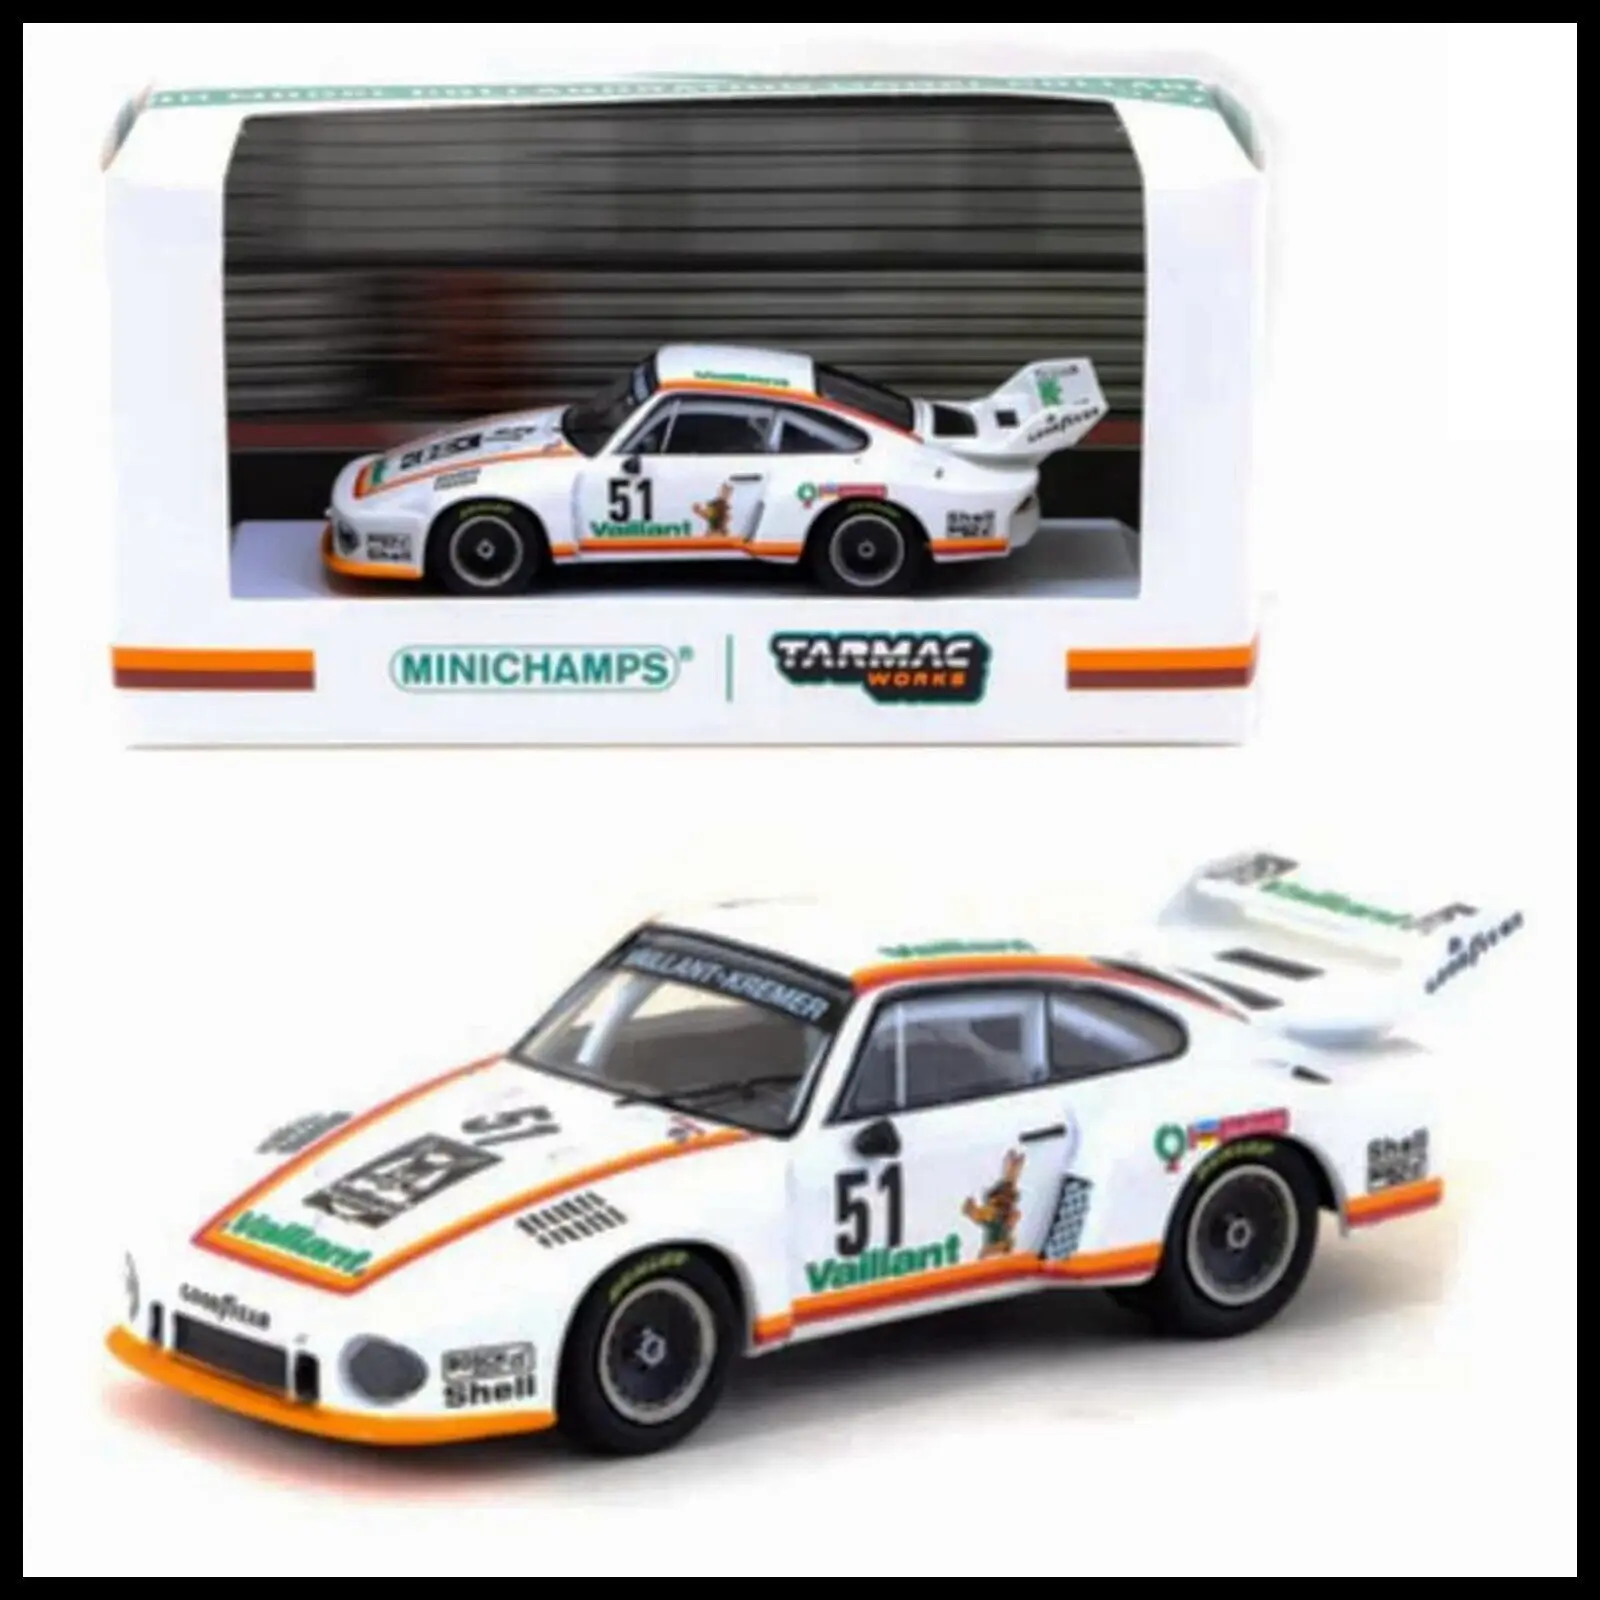 

Minichamps x Tarmac Works 1/64 935 Vaillant Zolder DRM 1977 51 Diecast Model Car Collection Limited Edition Hobby Toys